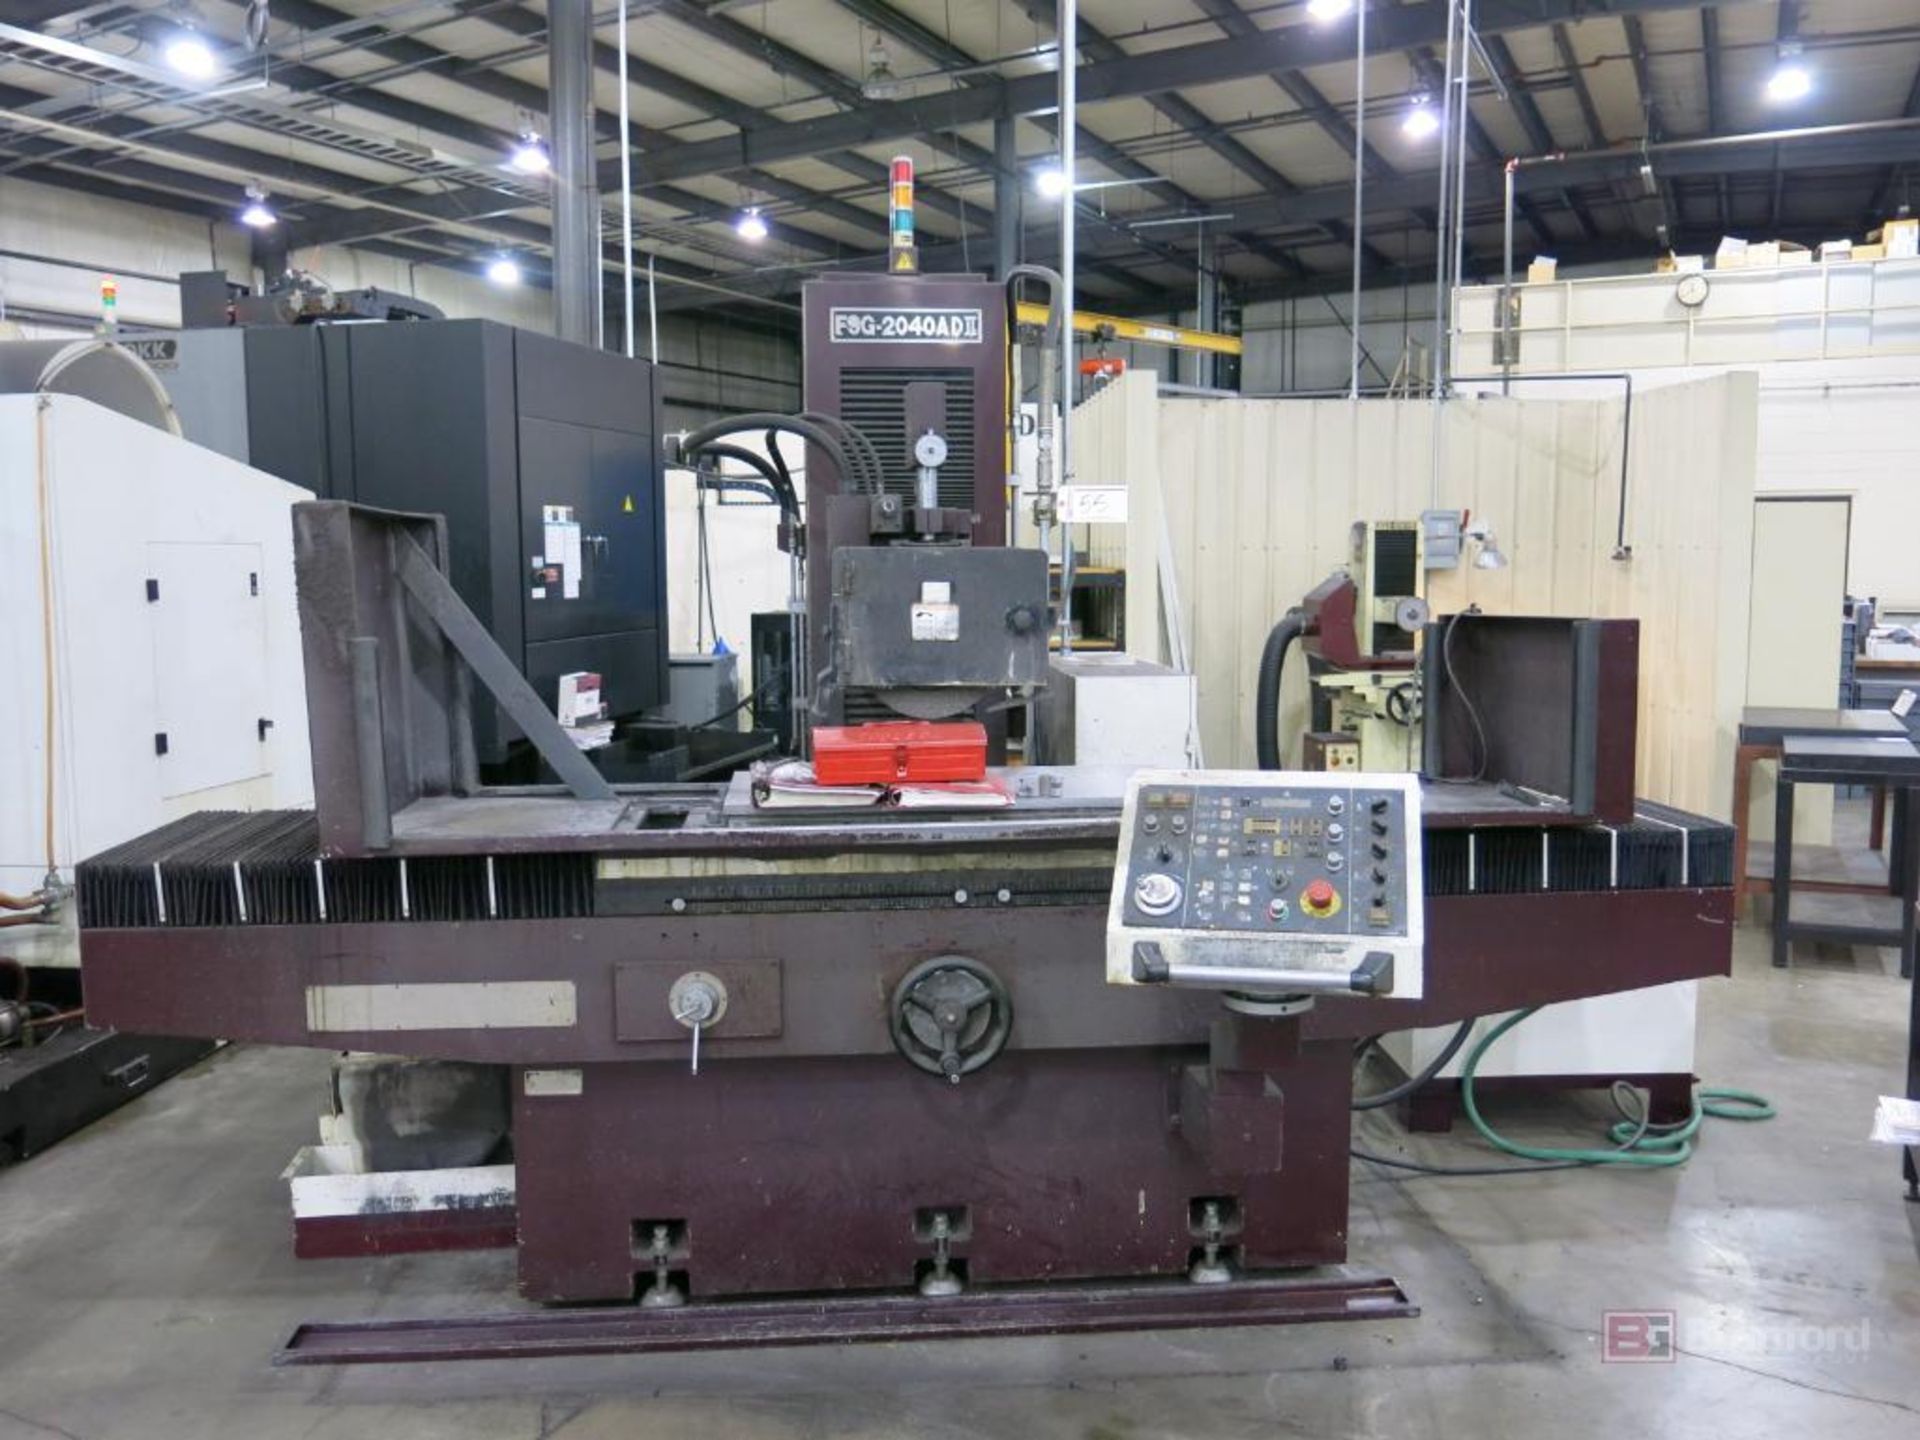 Chevalier Model FSG-240ADII Surface Grinder w/ 20" x 40" Magnetic Chuck - Image 2 of 6